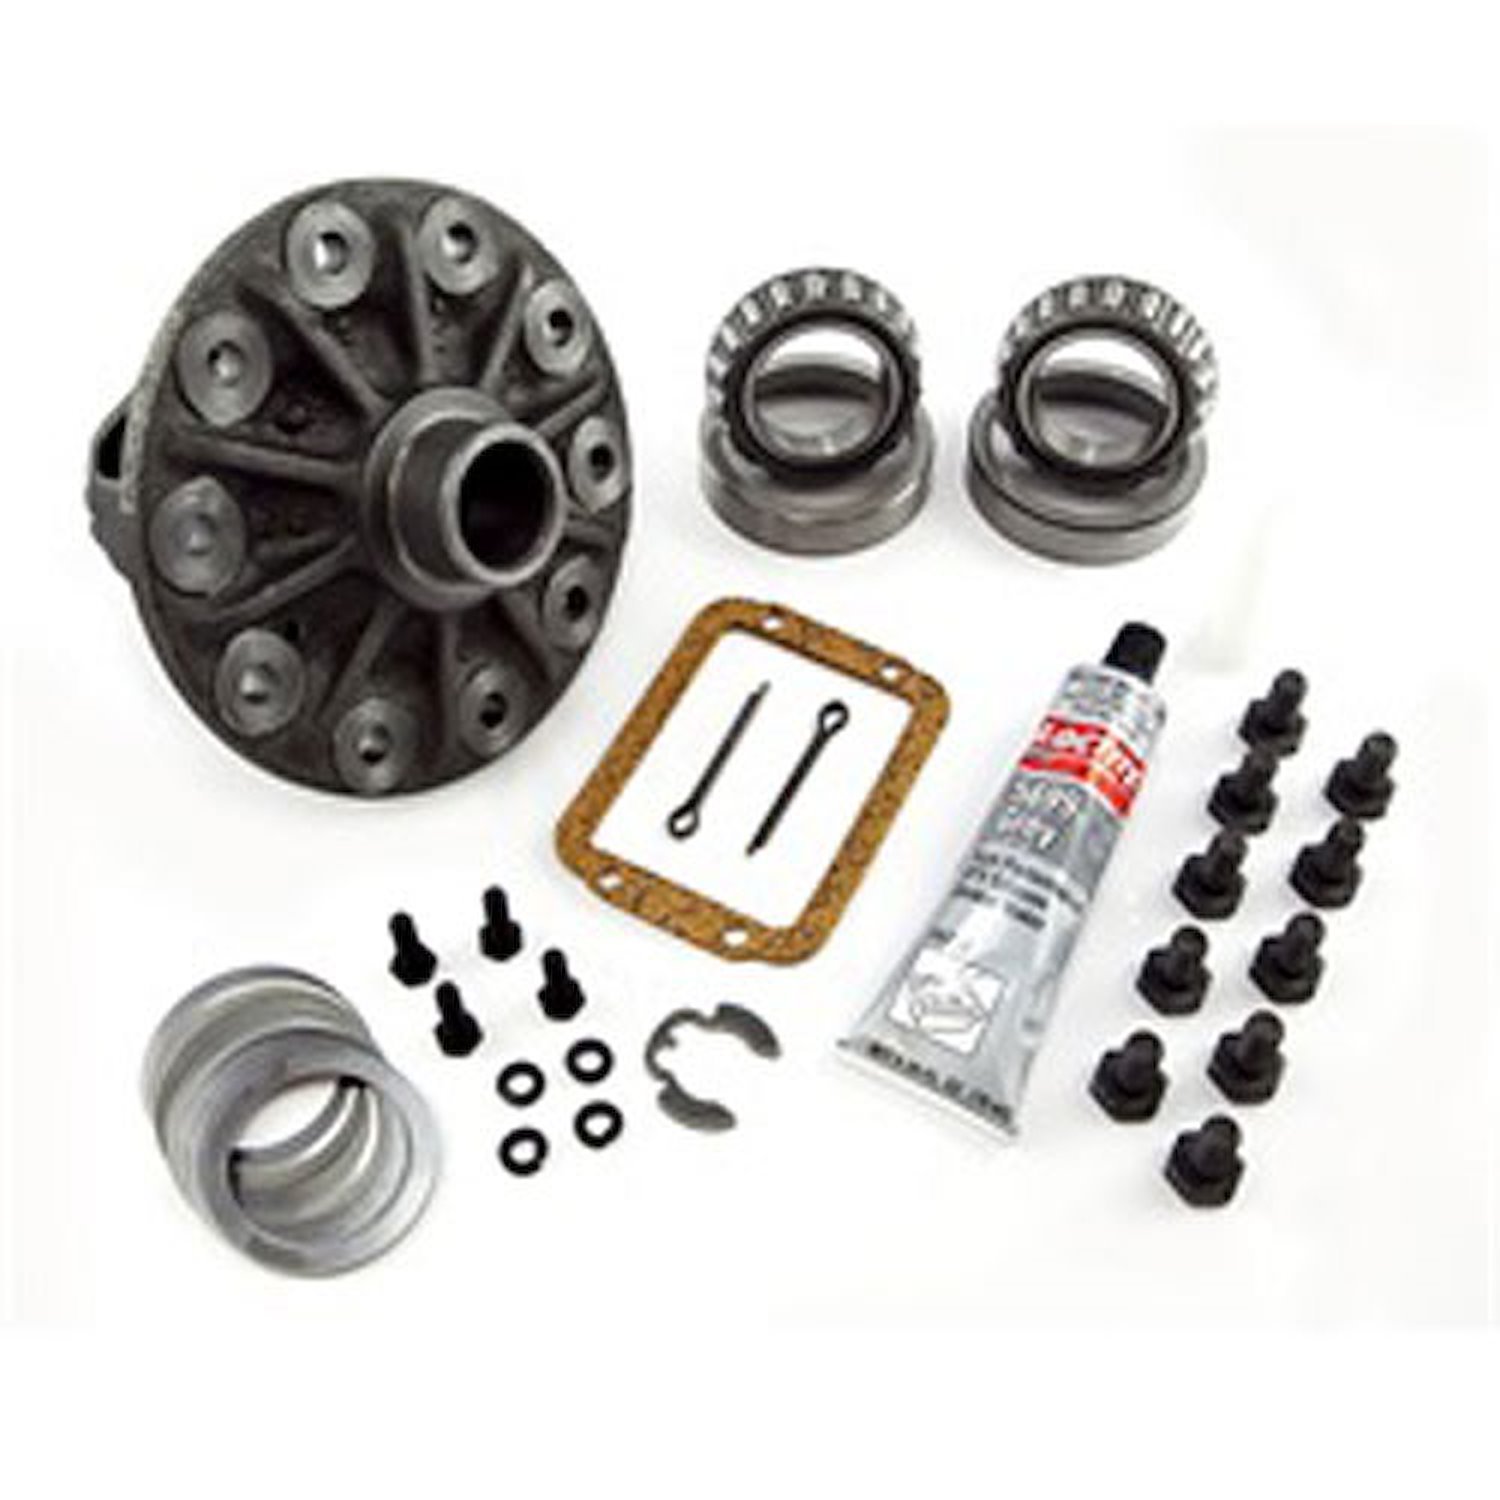 This differential case kit from Omix-ADA fits Dana 44 axles found in 07-16 Jeep Wrangler models with 1/2 inch ring gear bolts.